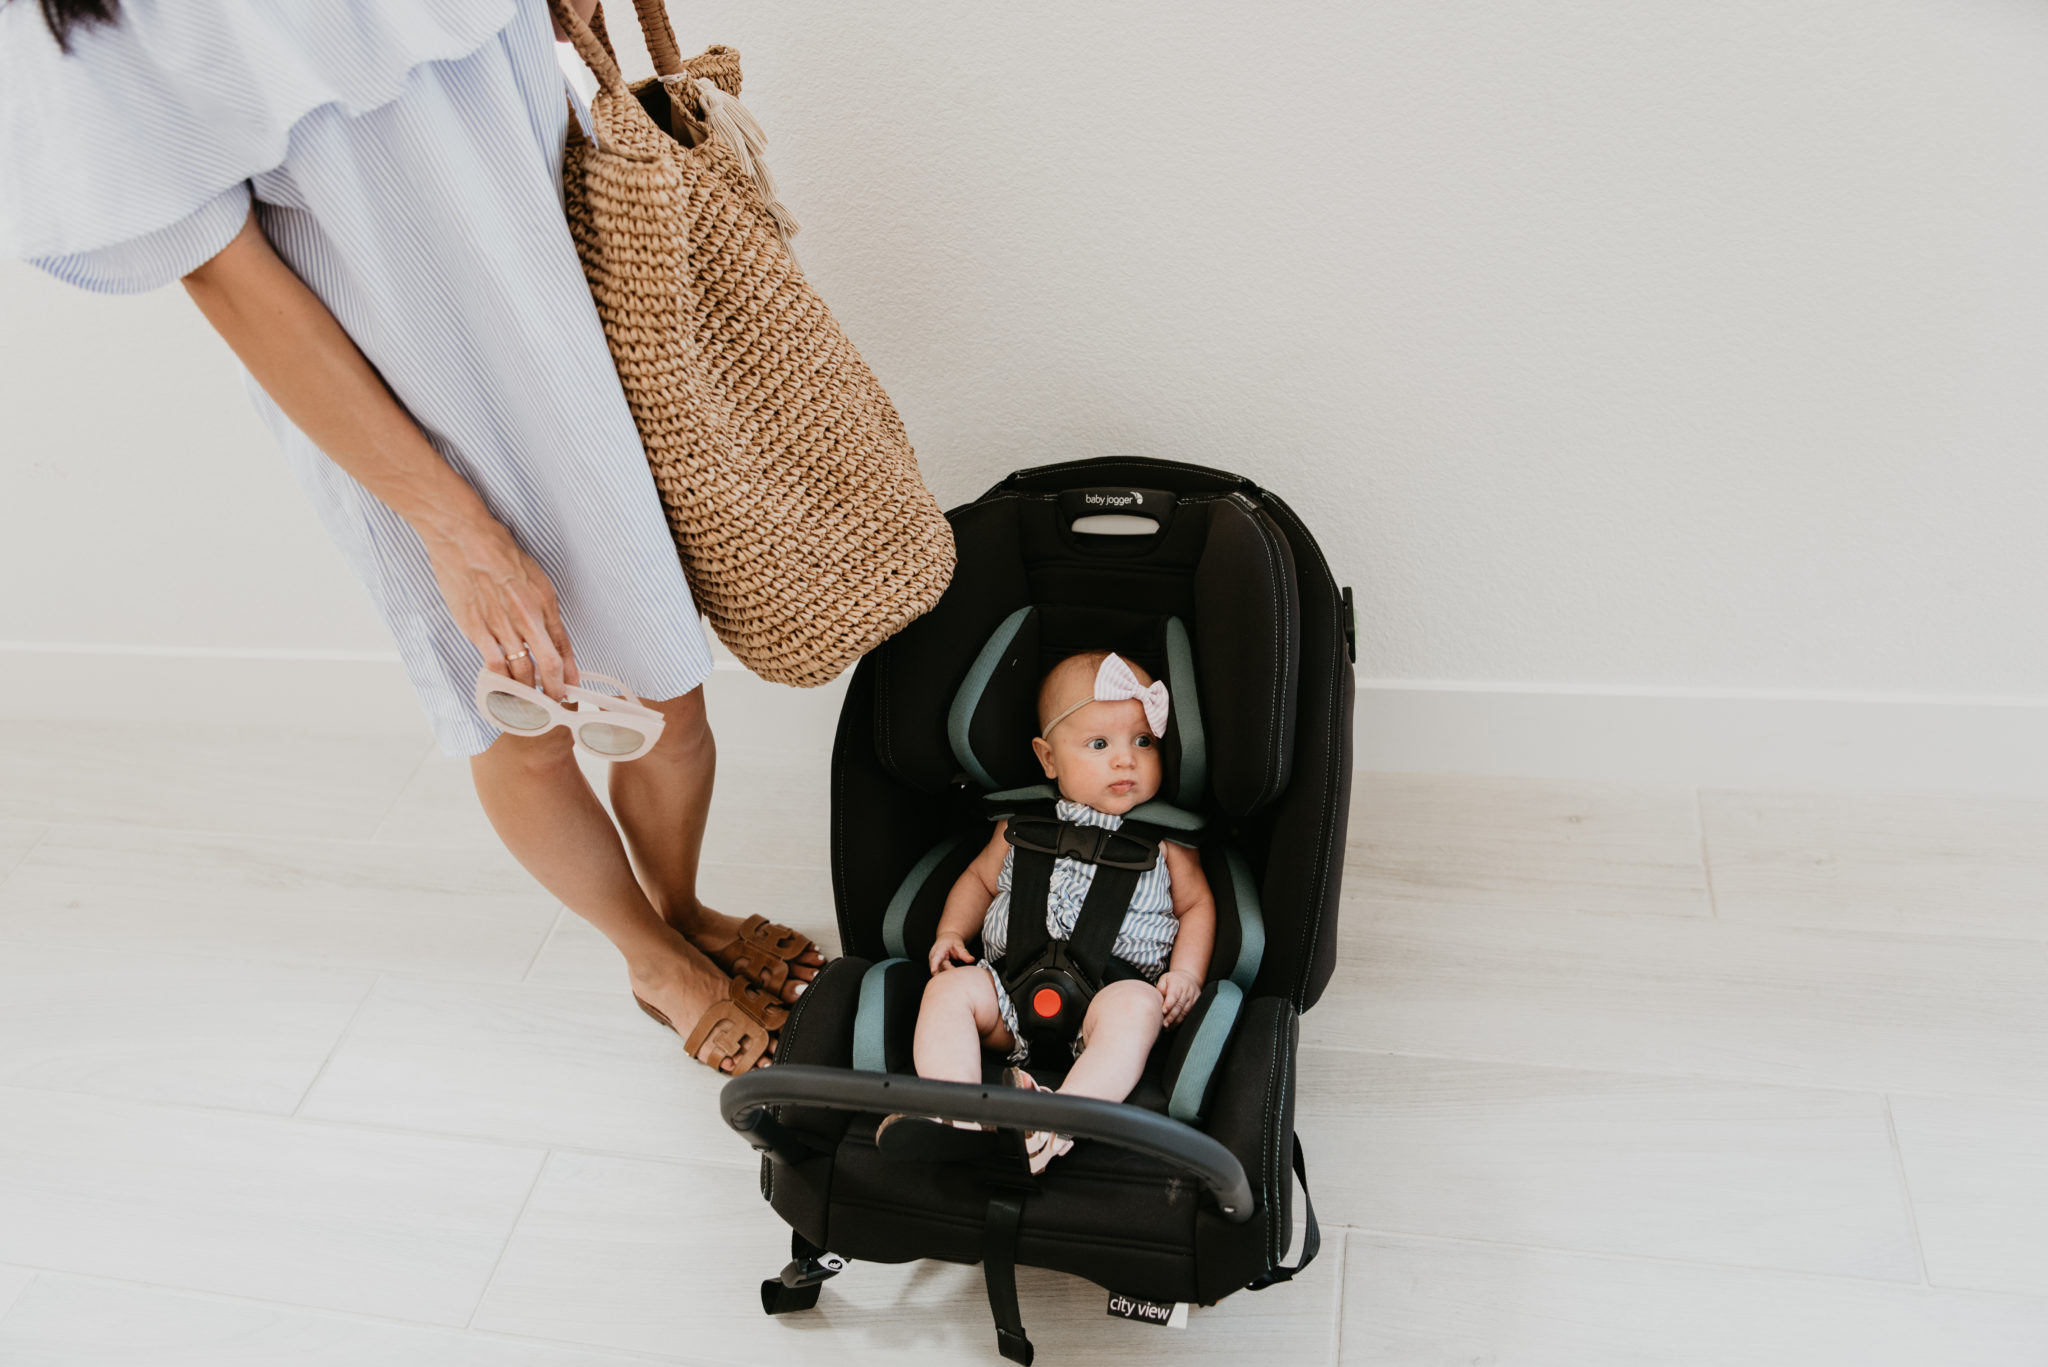 Baby Jogger Car Seat review featured by popular Las Vegas life and style blogger, Outfits & Outings